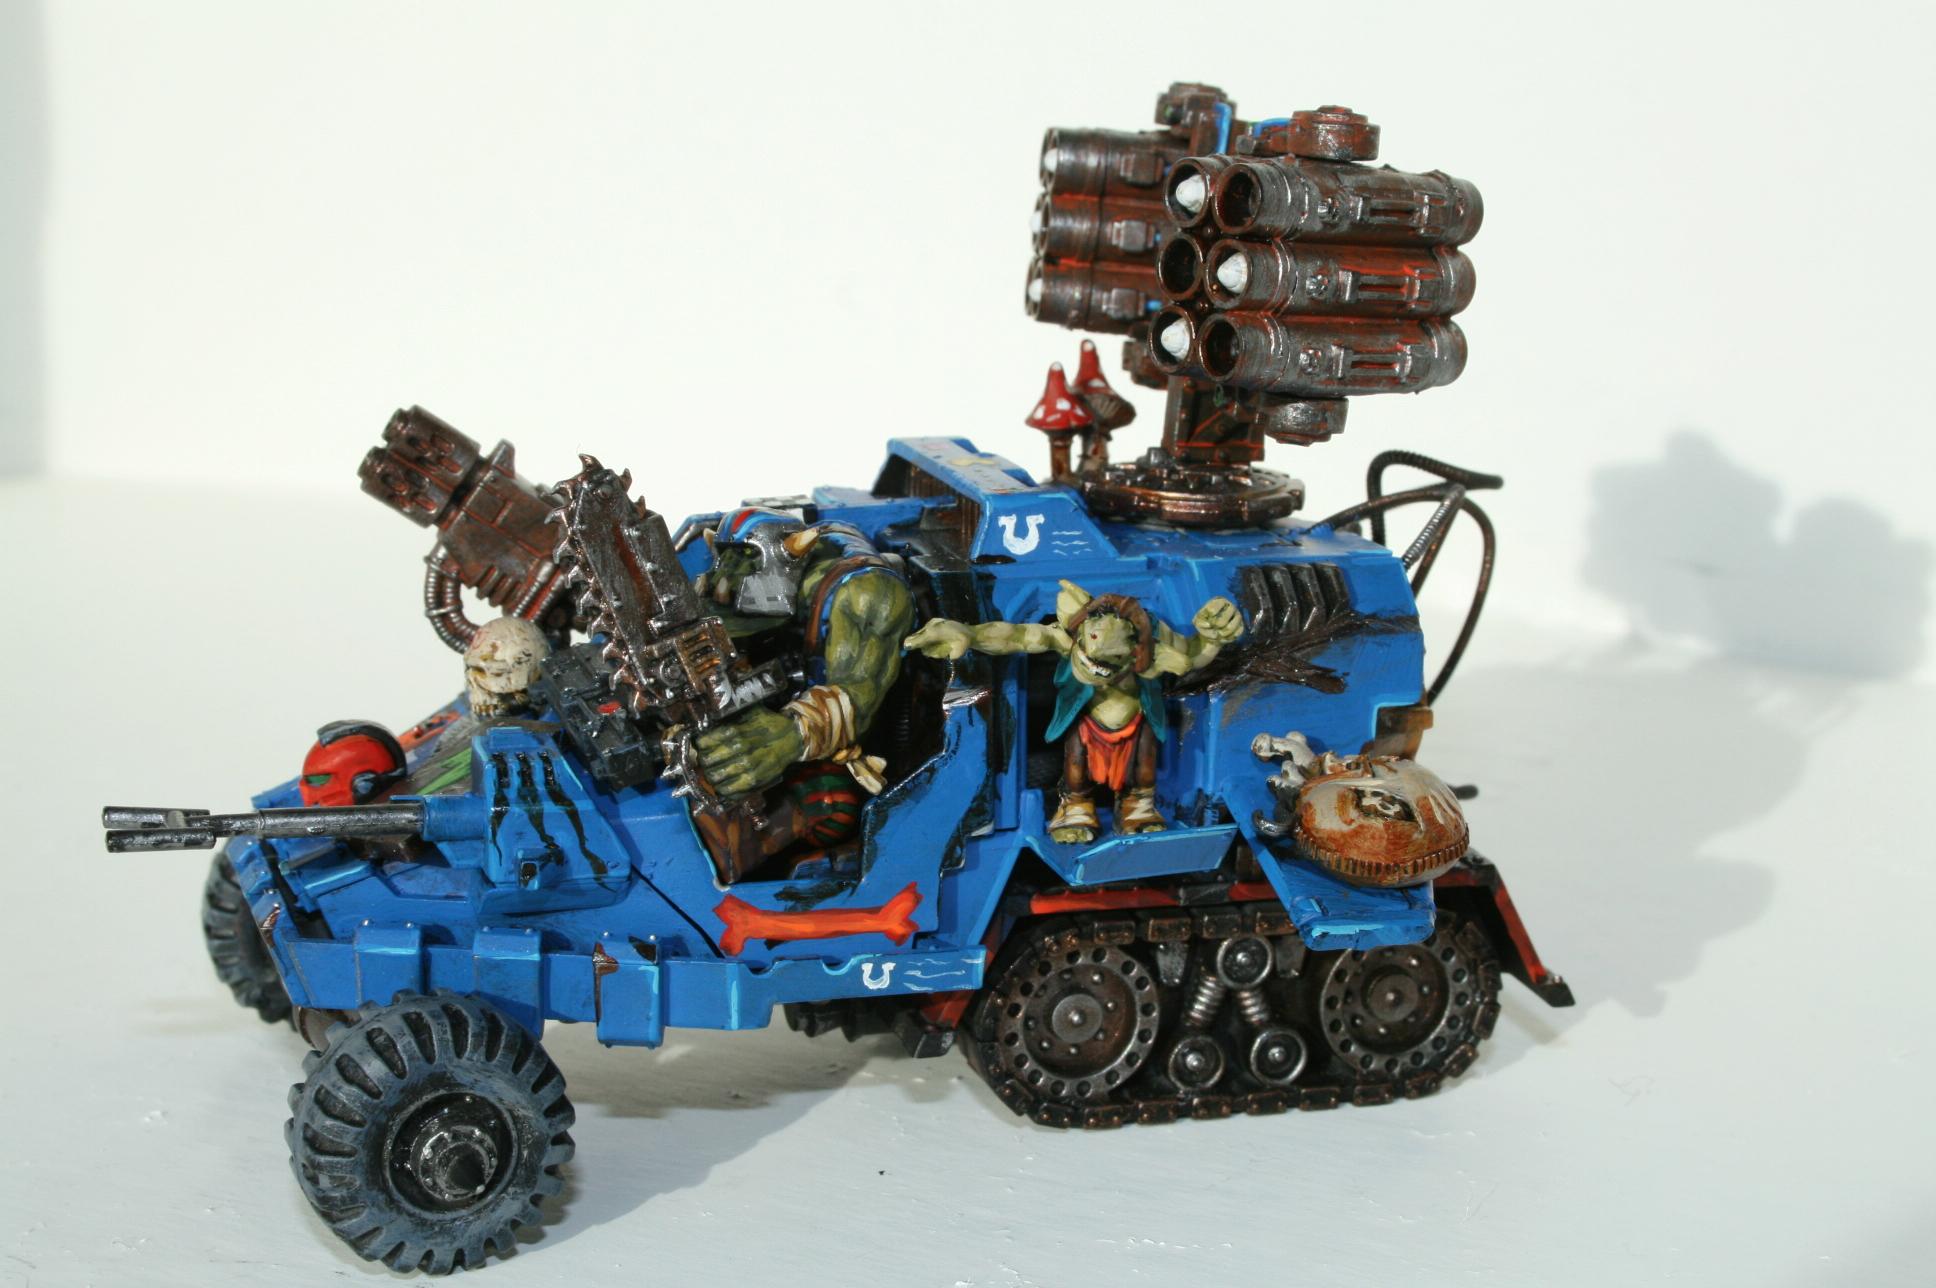 Buggy, Land Speeder, Looted, Orks - ORk buggy oiler - Gallery - | Roll the dice to see if I'm getting drunk.